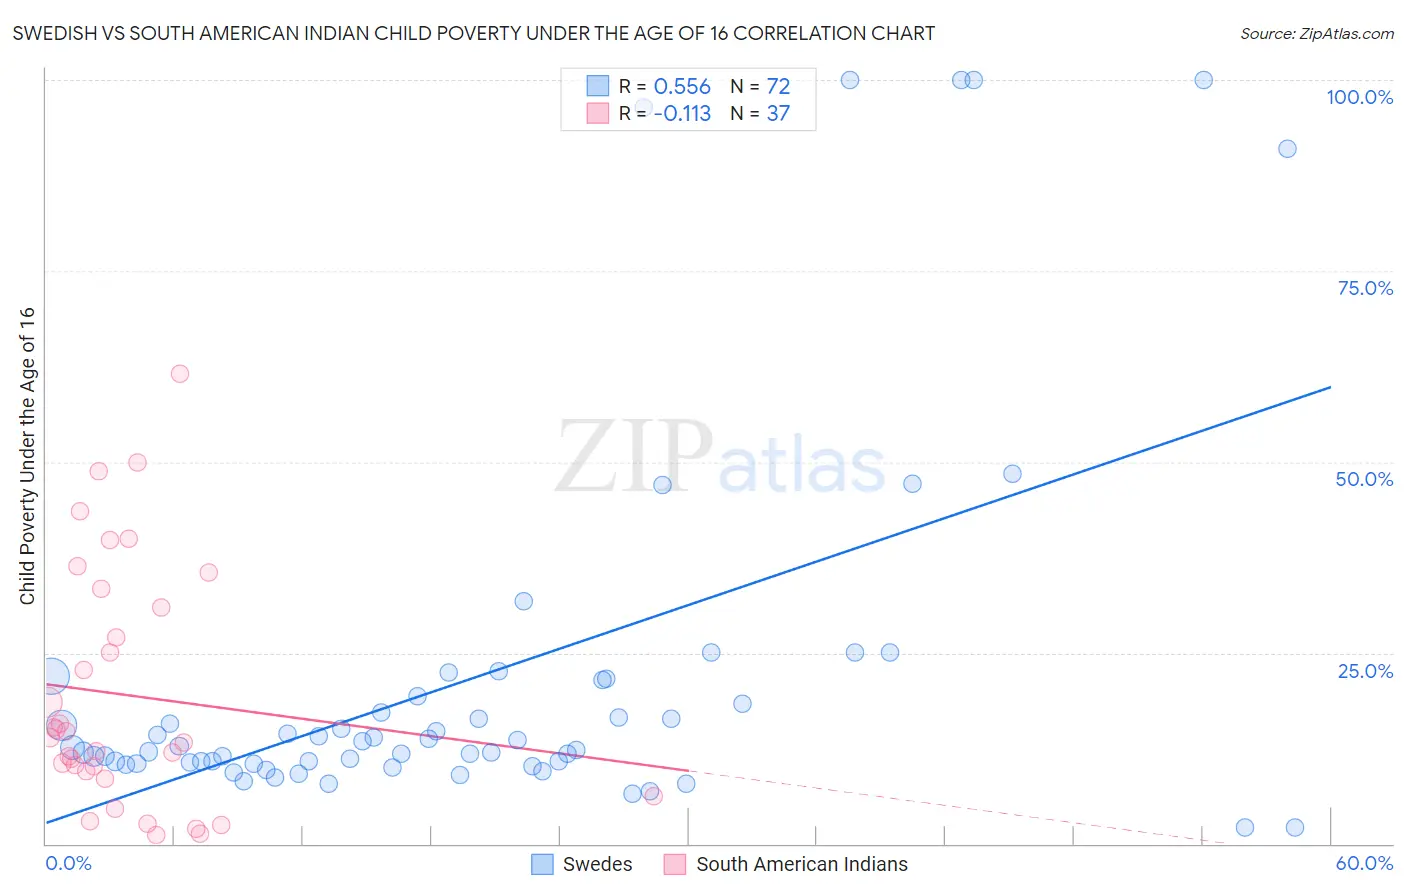 Swedish vs South American Indian Child Poverty Under the Age of 16